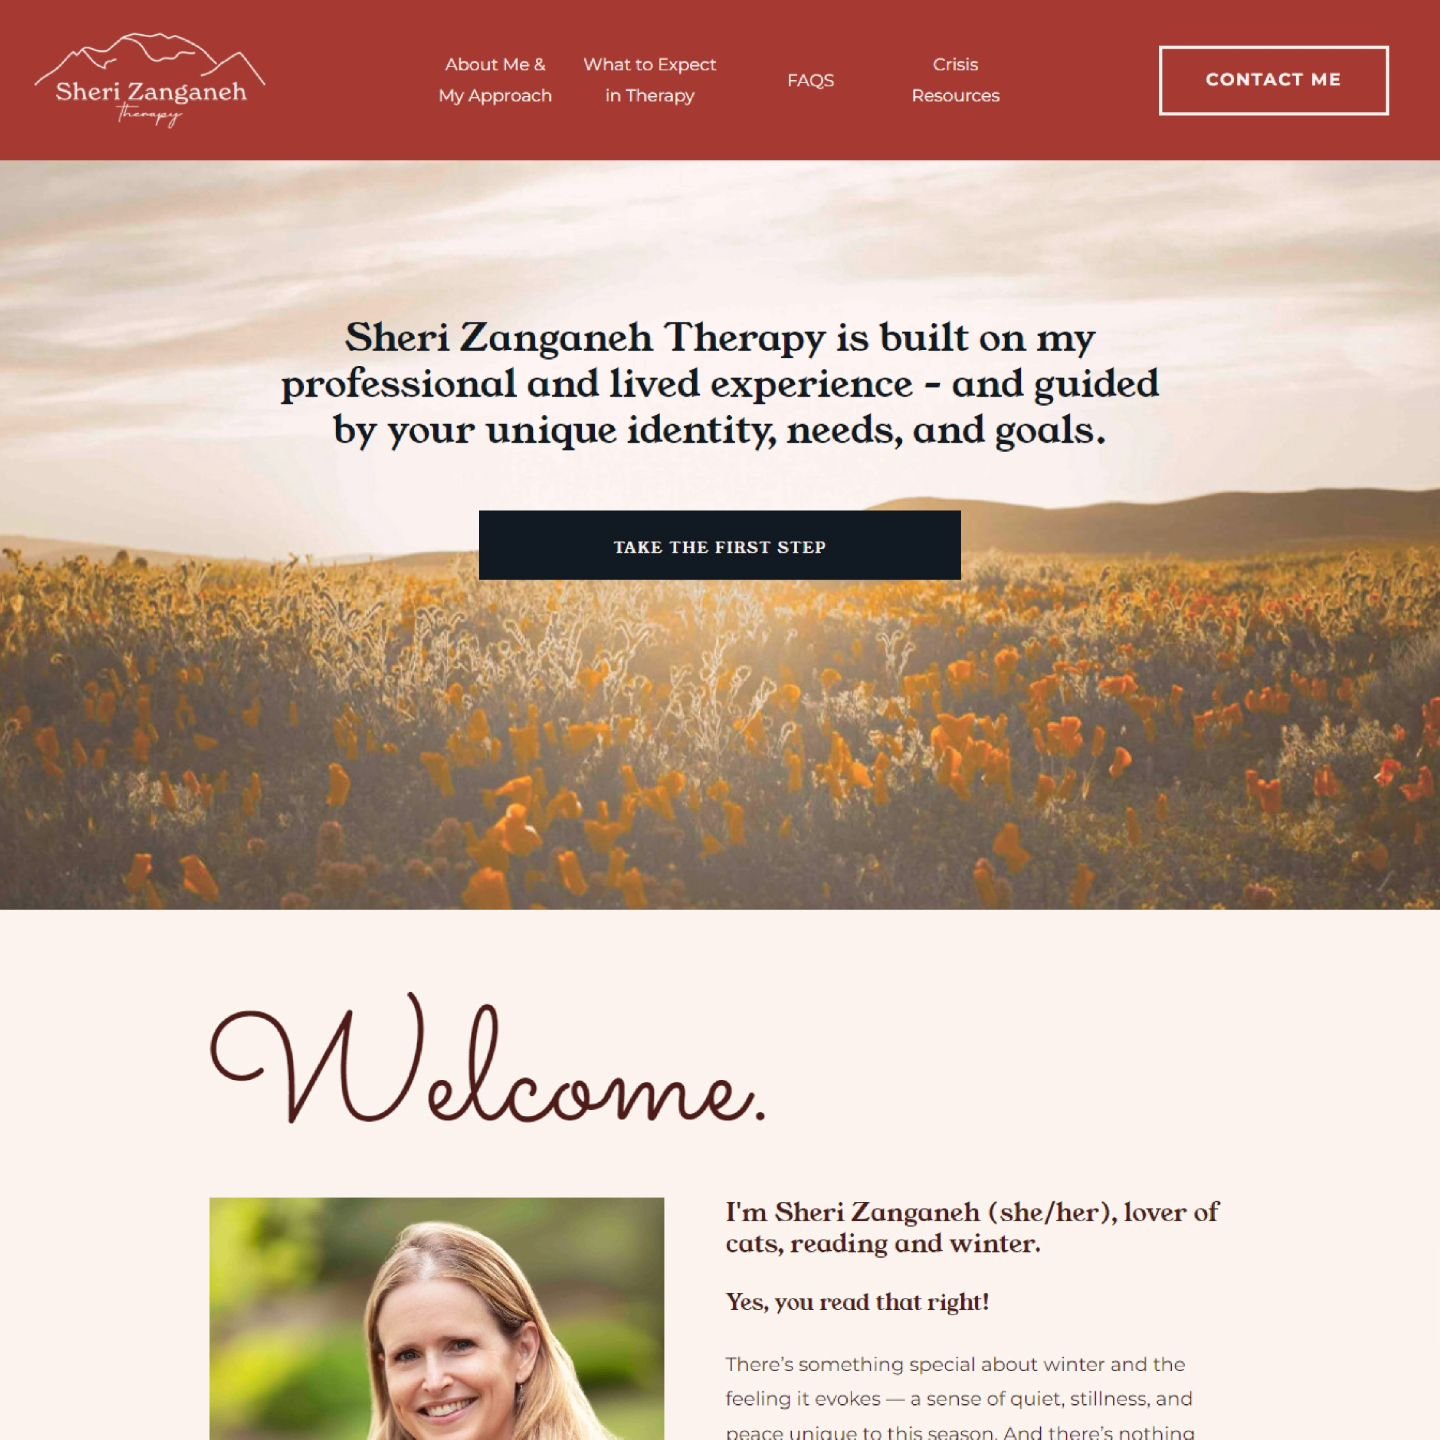 Every time I go back to the Sheri Zanganeh Therapy website, it feels like a warm cup of coffee in a cozy cabin ☕️

When you think of California, winter is probably not the first thing that comes to mind. But Sheri lives in the northern part of the s